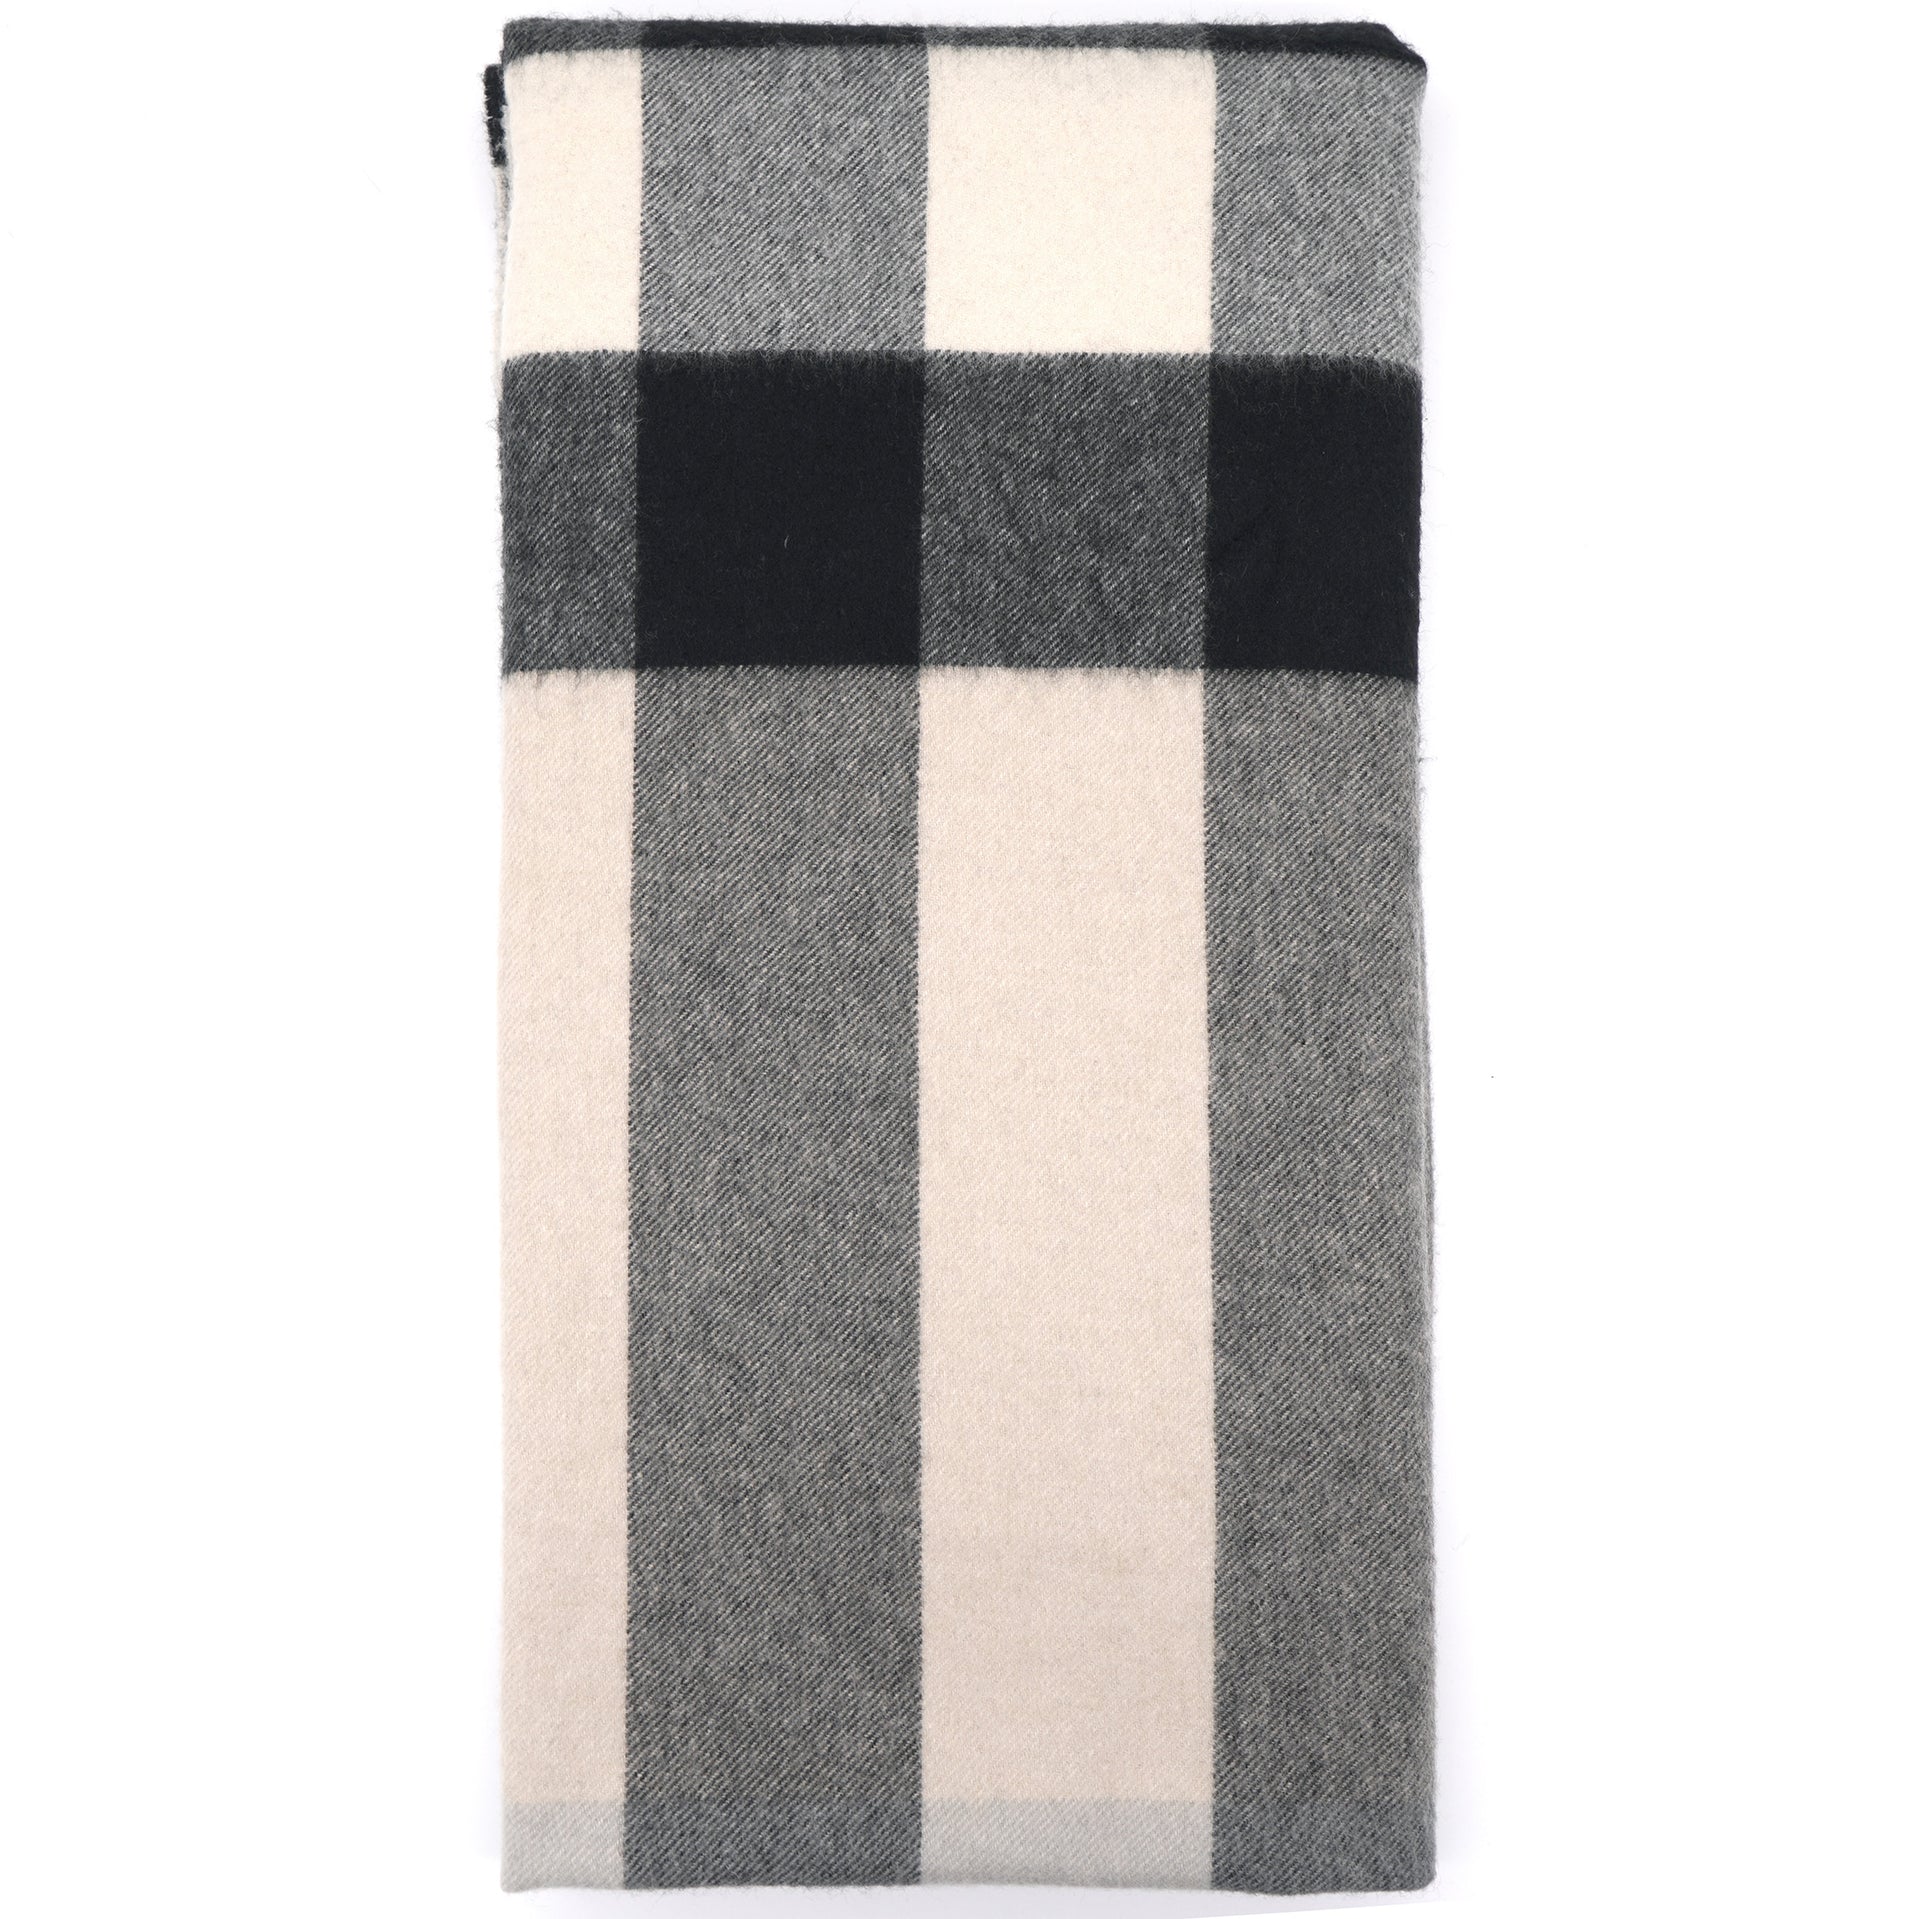 Light Grey/Ivory Giant Check Wool Scarf